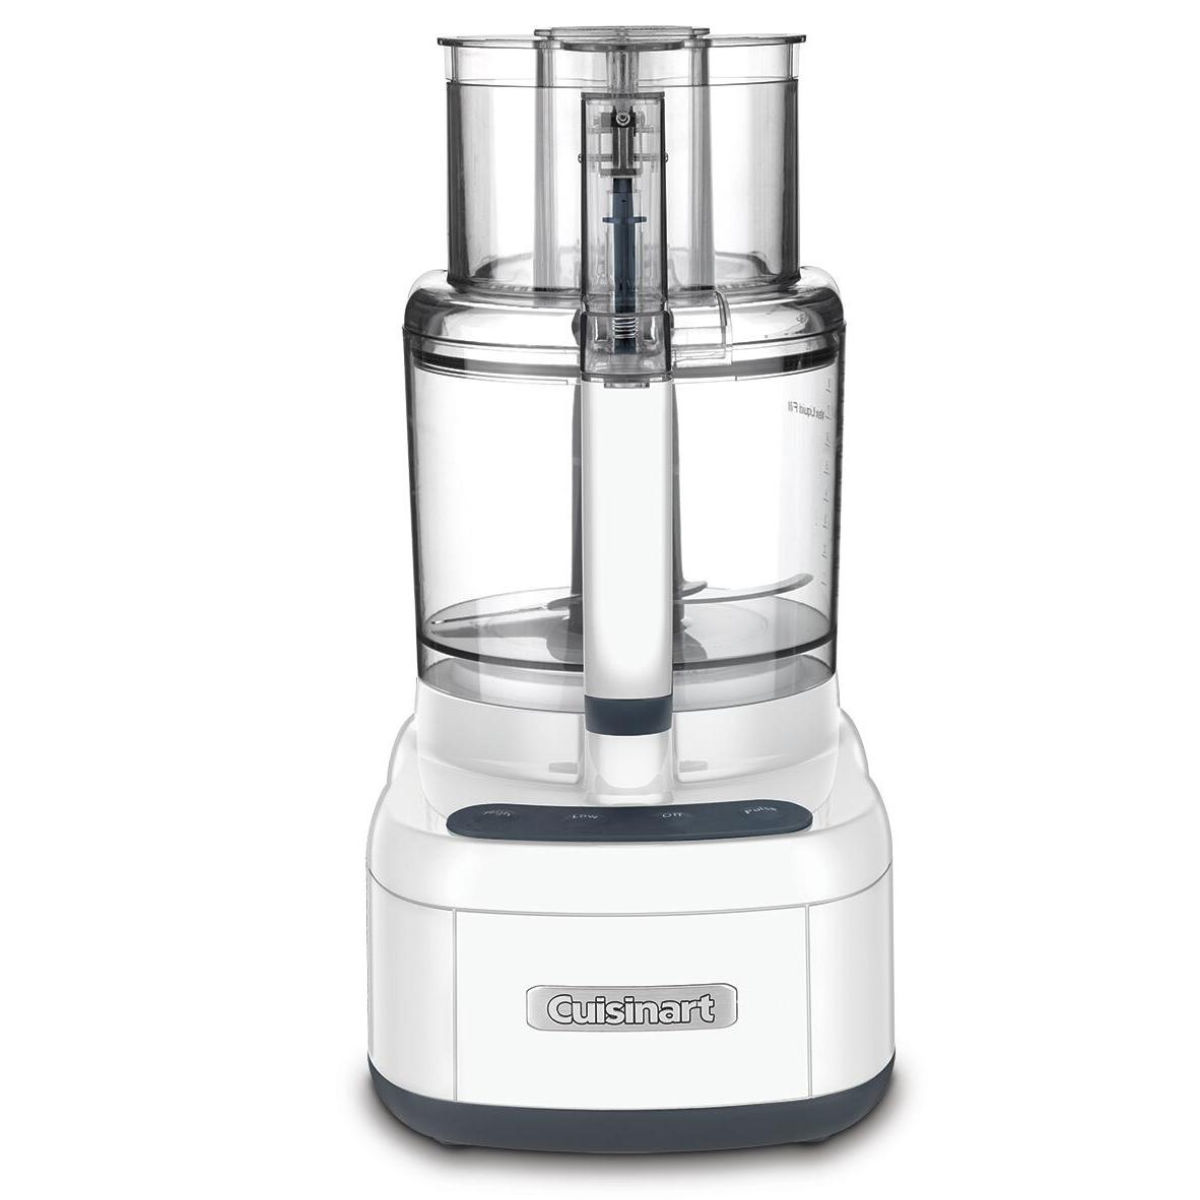 Cuisinart FP-11GW Elemental 11 11-Cup 3-Speed Glossy White Food Processor